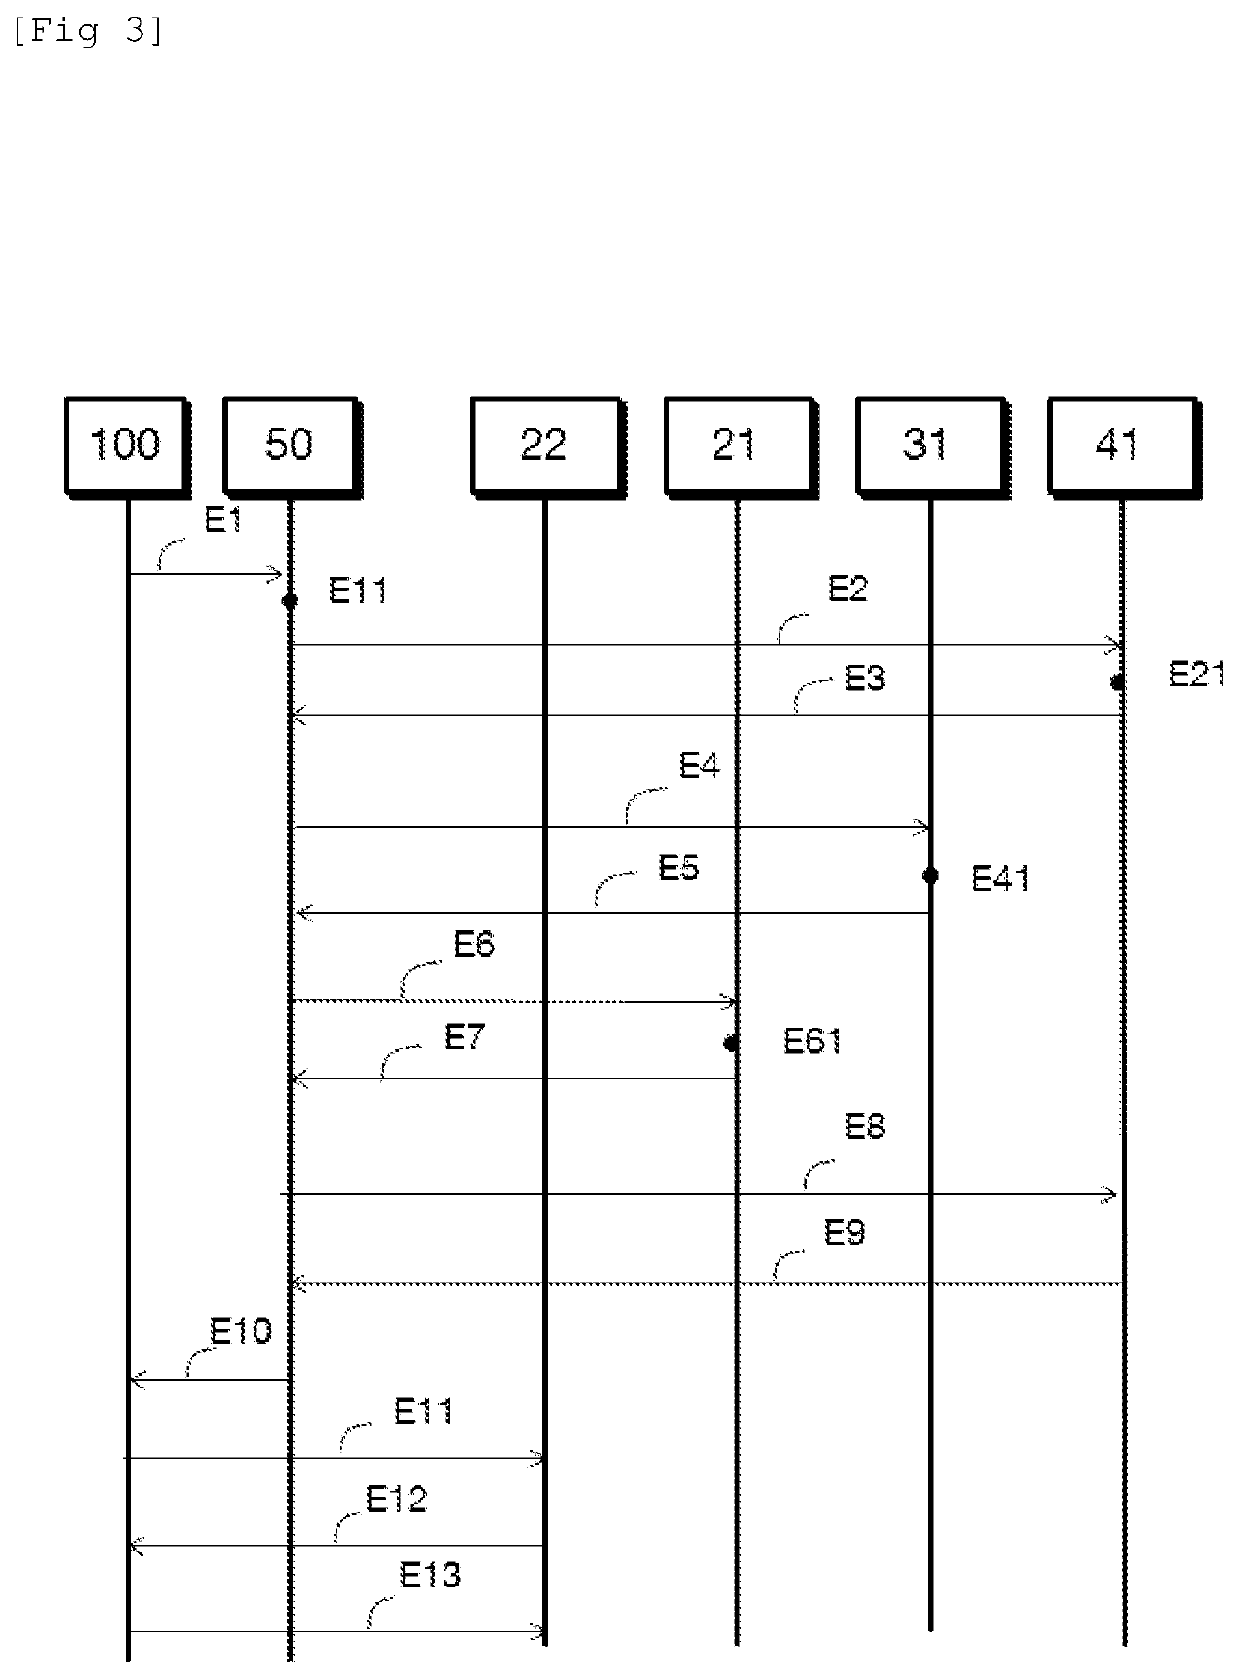 Method for determining a delegation chain associated with a domain name resolution in a communication network